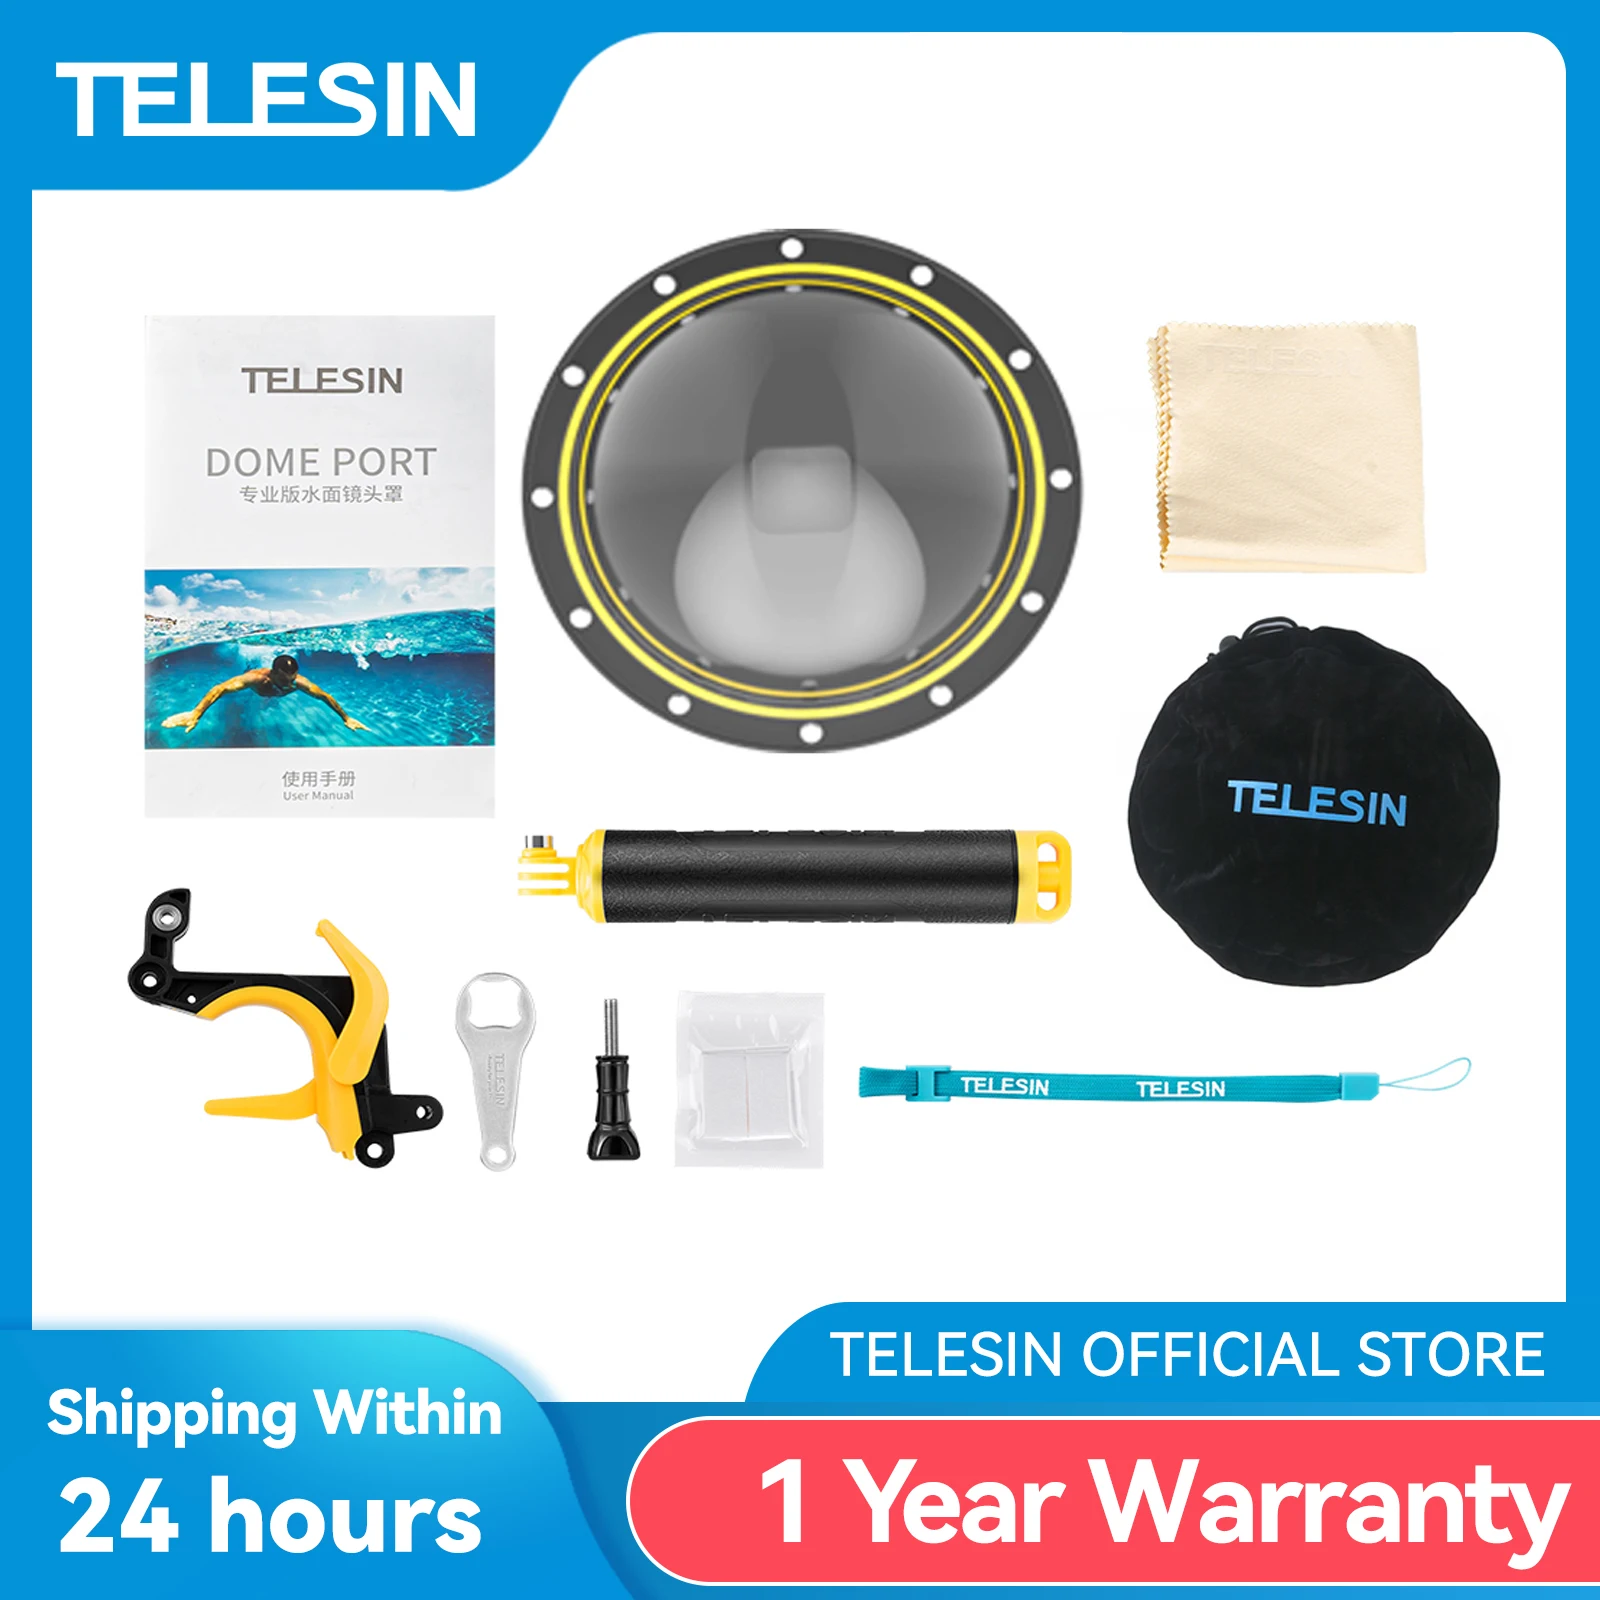 Telesin 6'' Dome Port 30m Waterproof Housing Case With Floating Handle  Trigger For Gopro Hero 9 10 Black Underwater Cover - Sports & Action Video  Cameras Accessories - AliExpress